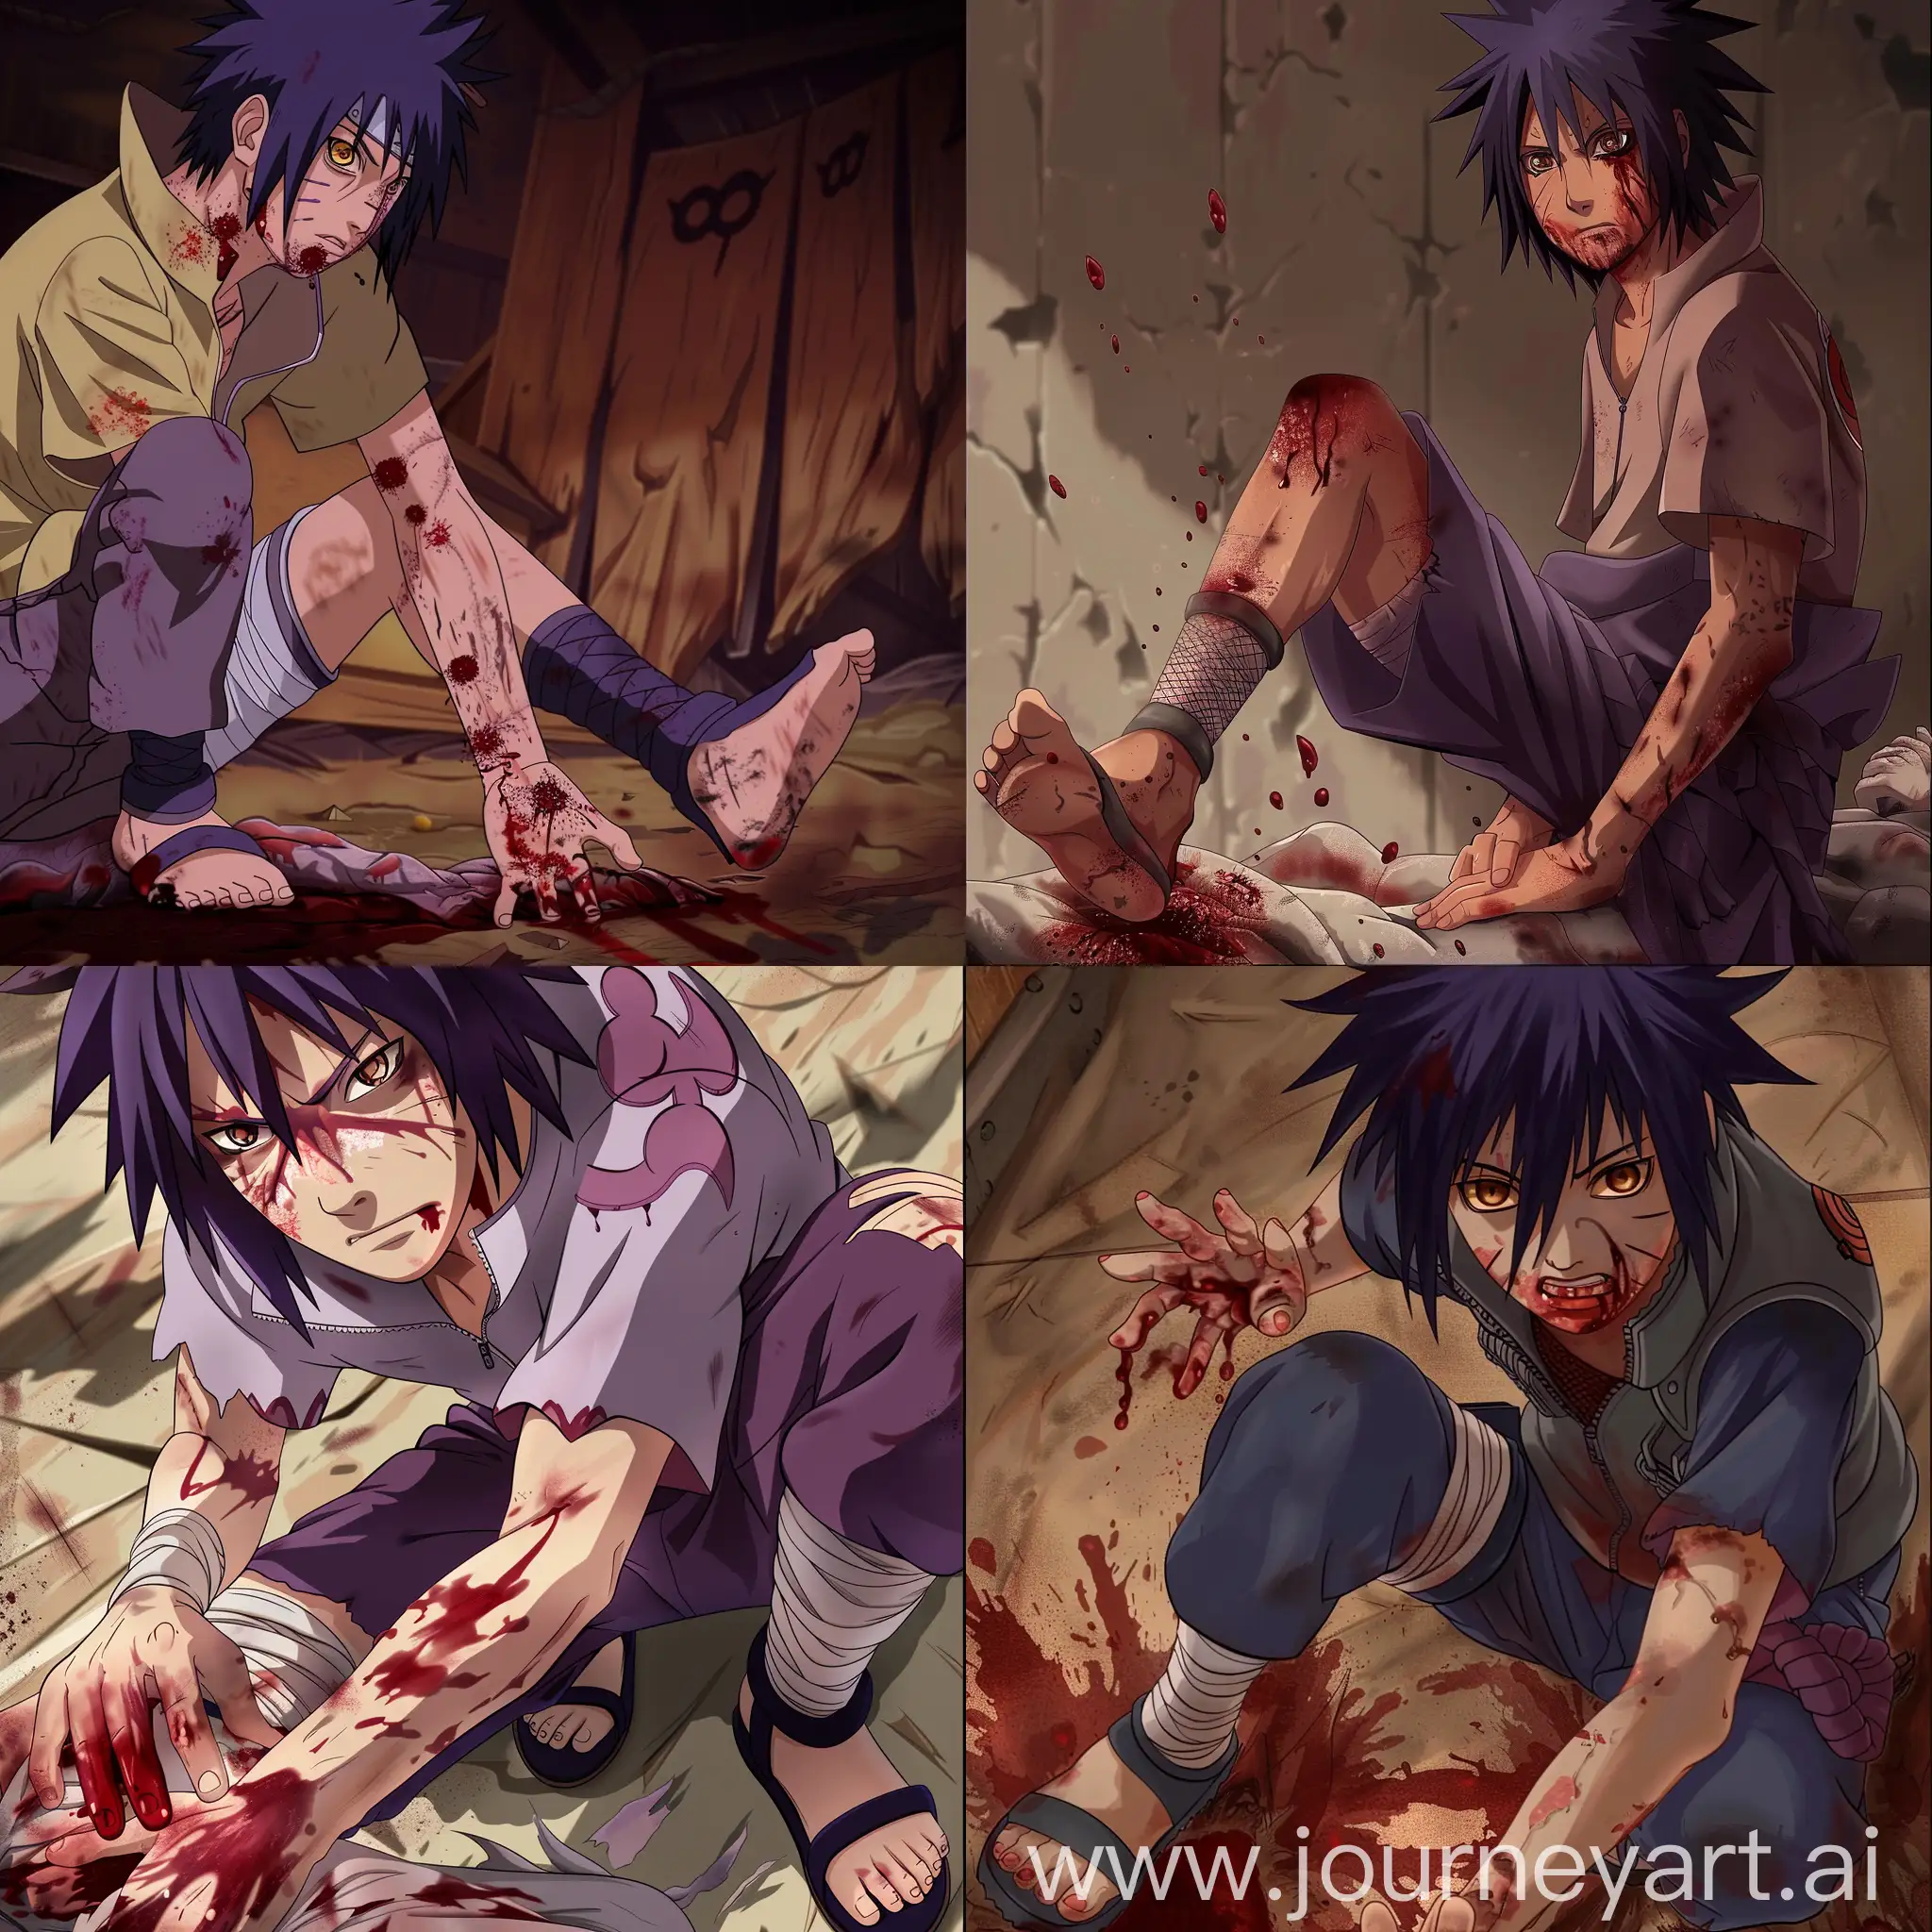 style of naruto, Juusan, a chunin from Amegakure, nagato haircut, dark purple hair, brown eyes, bloodied face, blood on hands, standing with his foot on a corpse